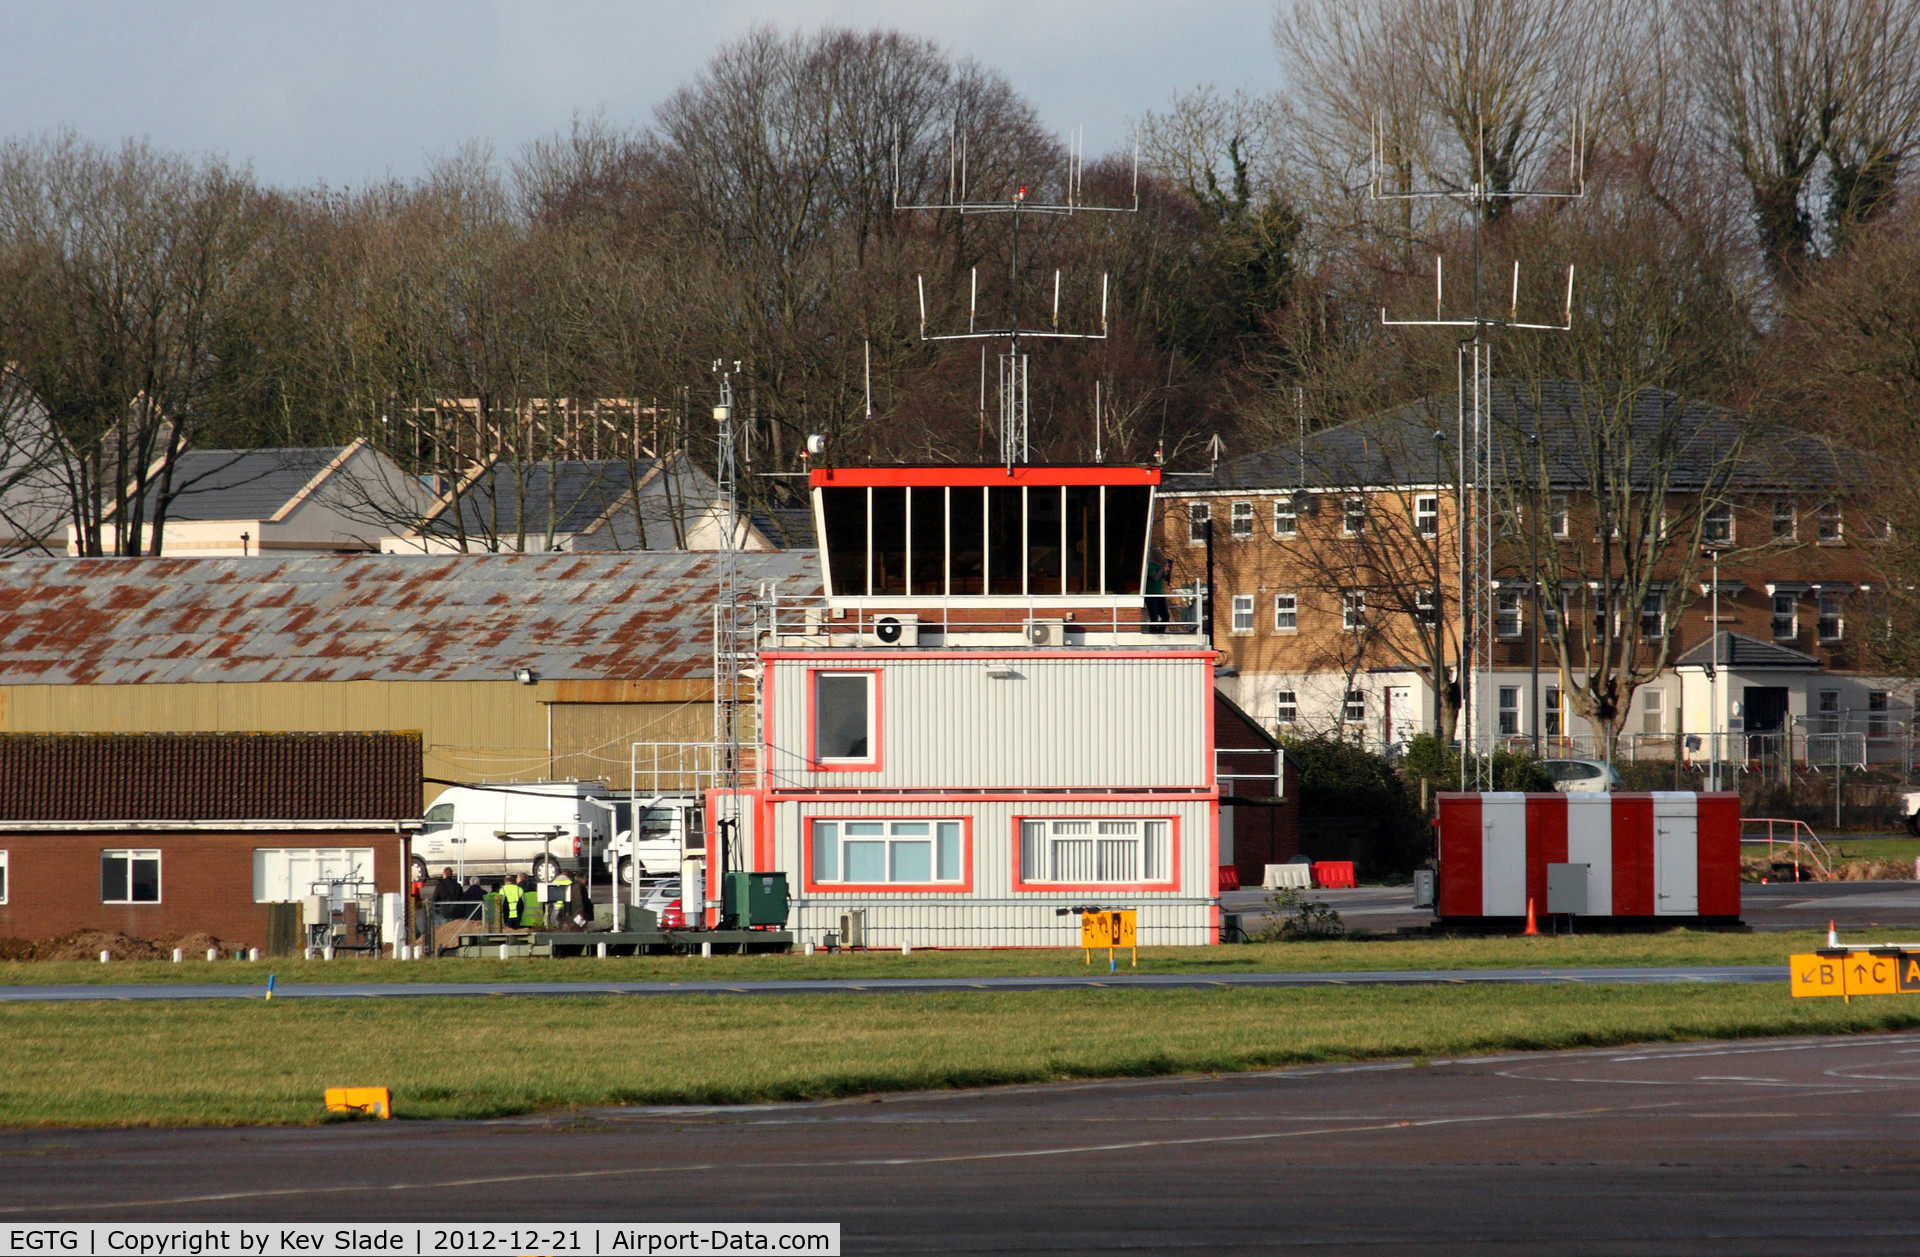 Bristol Filton Airport, Filton, England United Kingdom (EGTG) - The ATC at Filton 45 minutes before the airfield closed for good. Over the next few years the site will become a housing estate and retail park. Thankfully a small piece of history will remain when a museum is opened on site to show off the last Concorde 